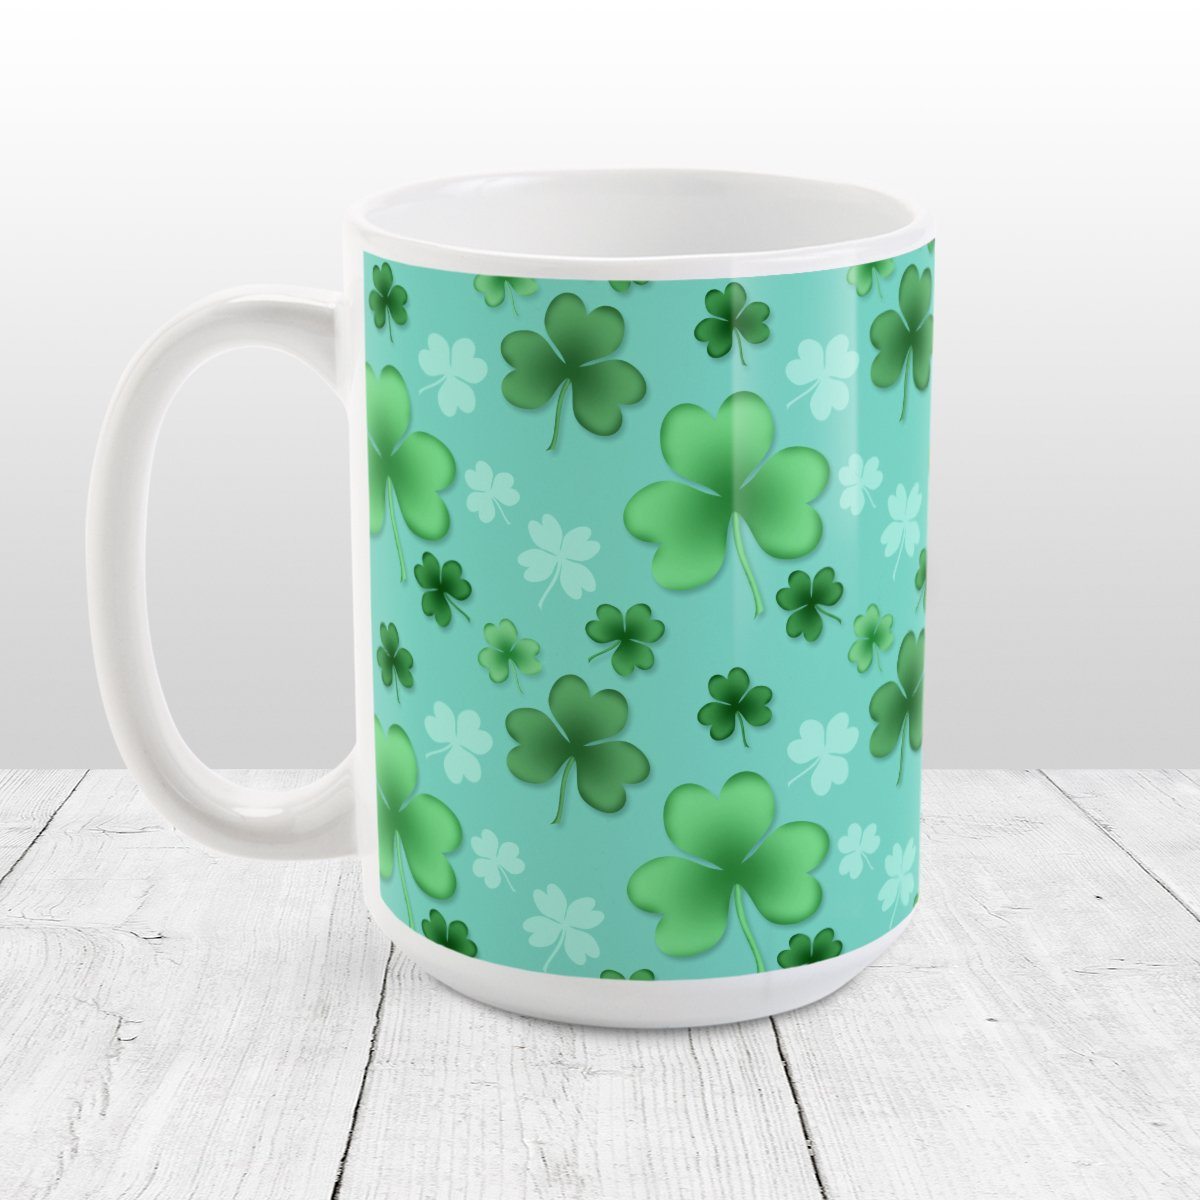 Clover Mug - St Patrick's Day - Lucky Clover Pattern Teal and Green - Clover Mug at Amy's Coffee Mugs. A ceramic coffee mug designed with a lucky green clover pattern with a 4-leaf clover among 3-leaf clovers, in different shades of green, over a teal background that wraps around the mug to the handle.